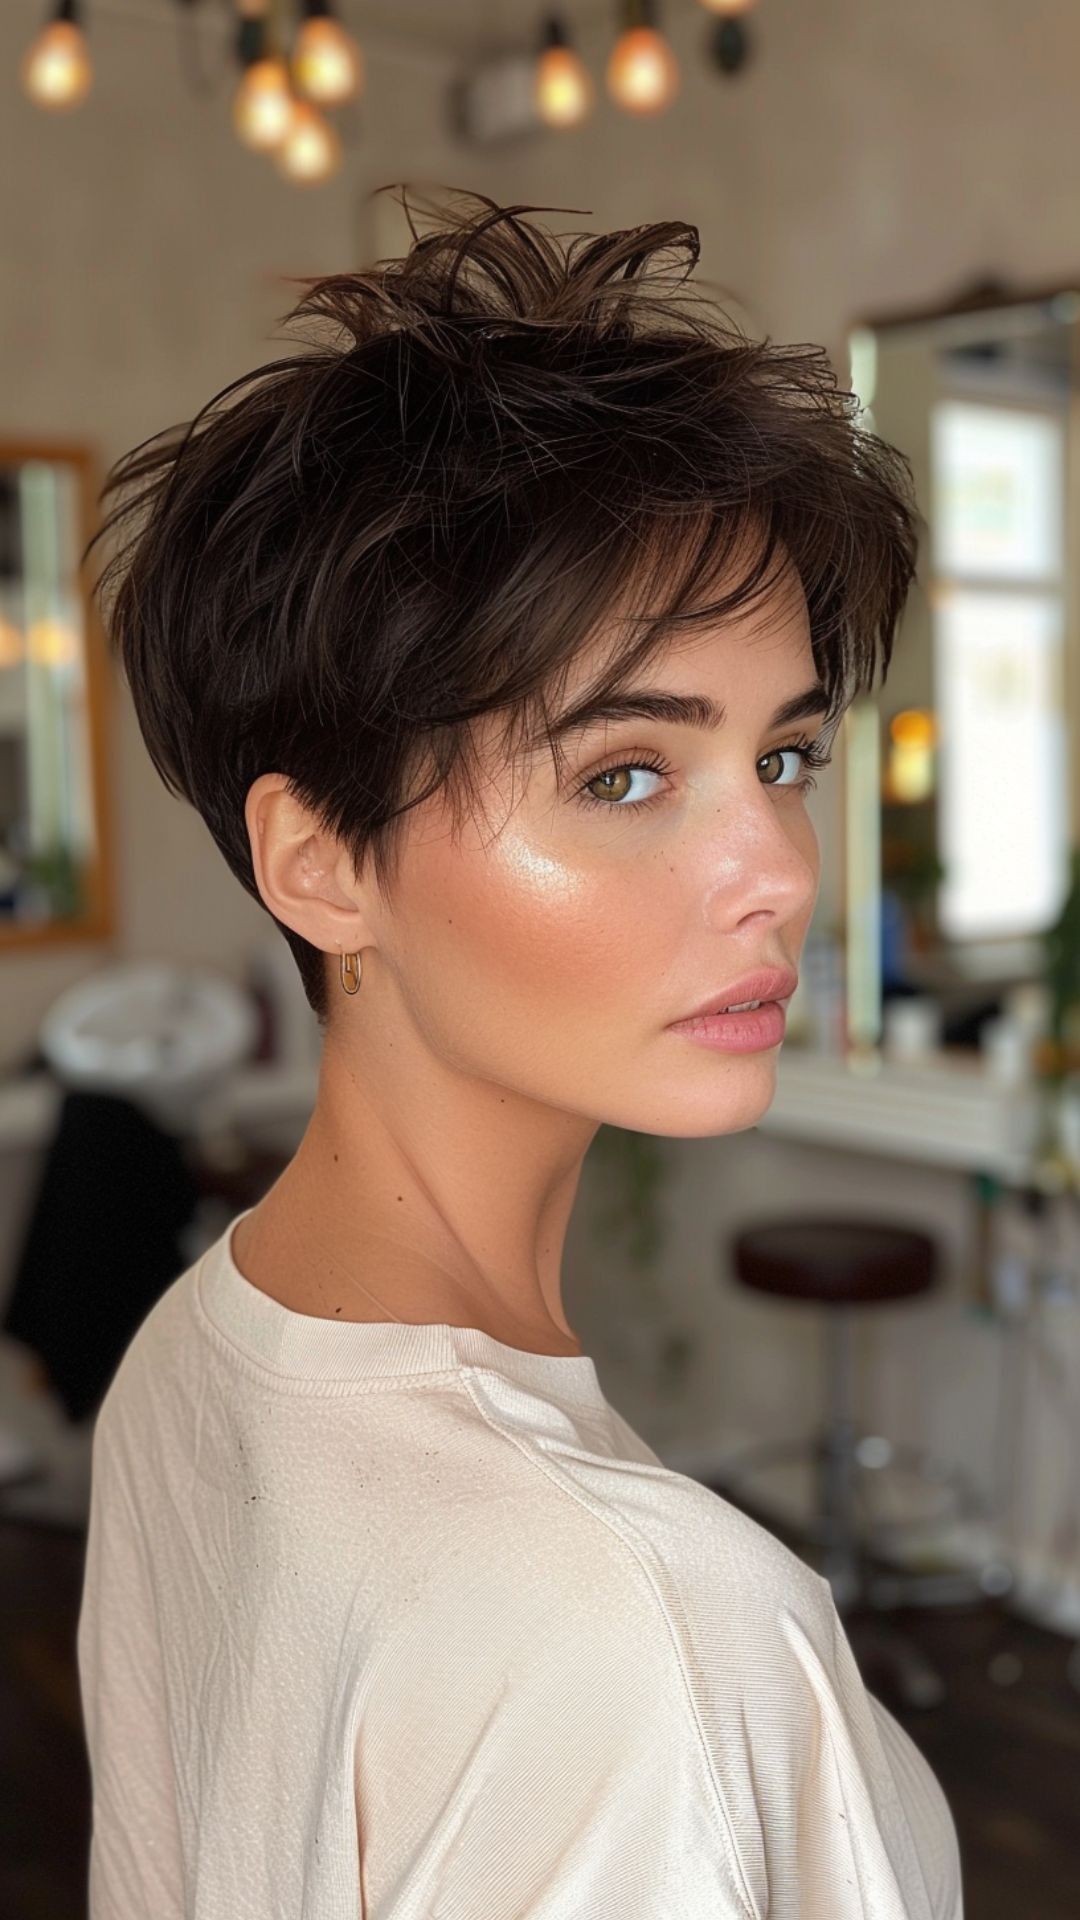 Chic and Stylish: The Best Short Hairstyles for Women